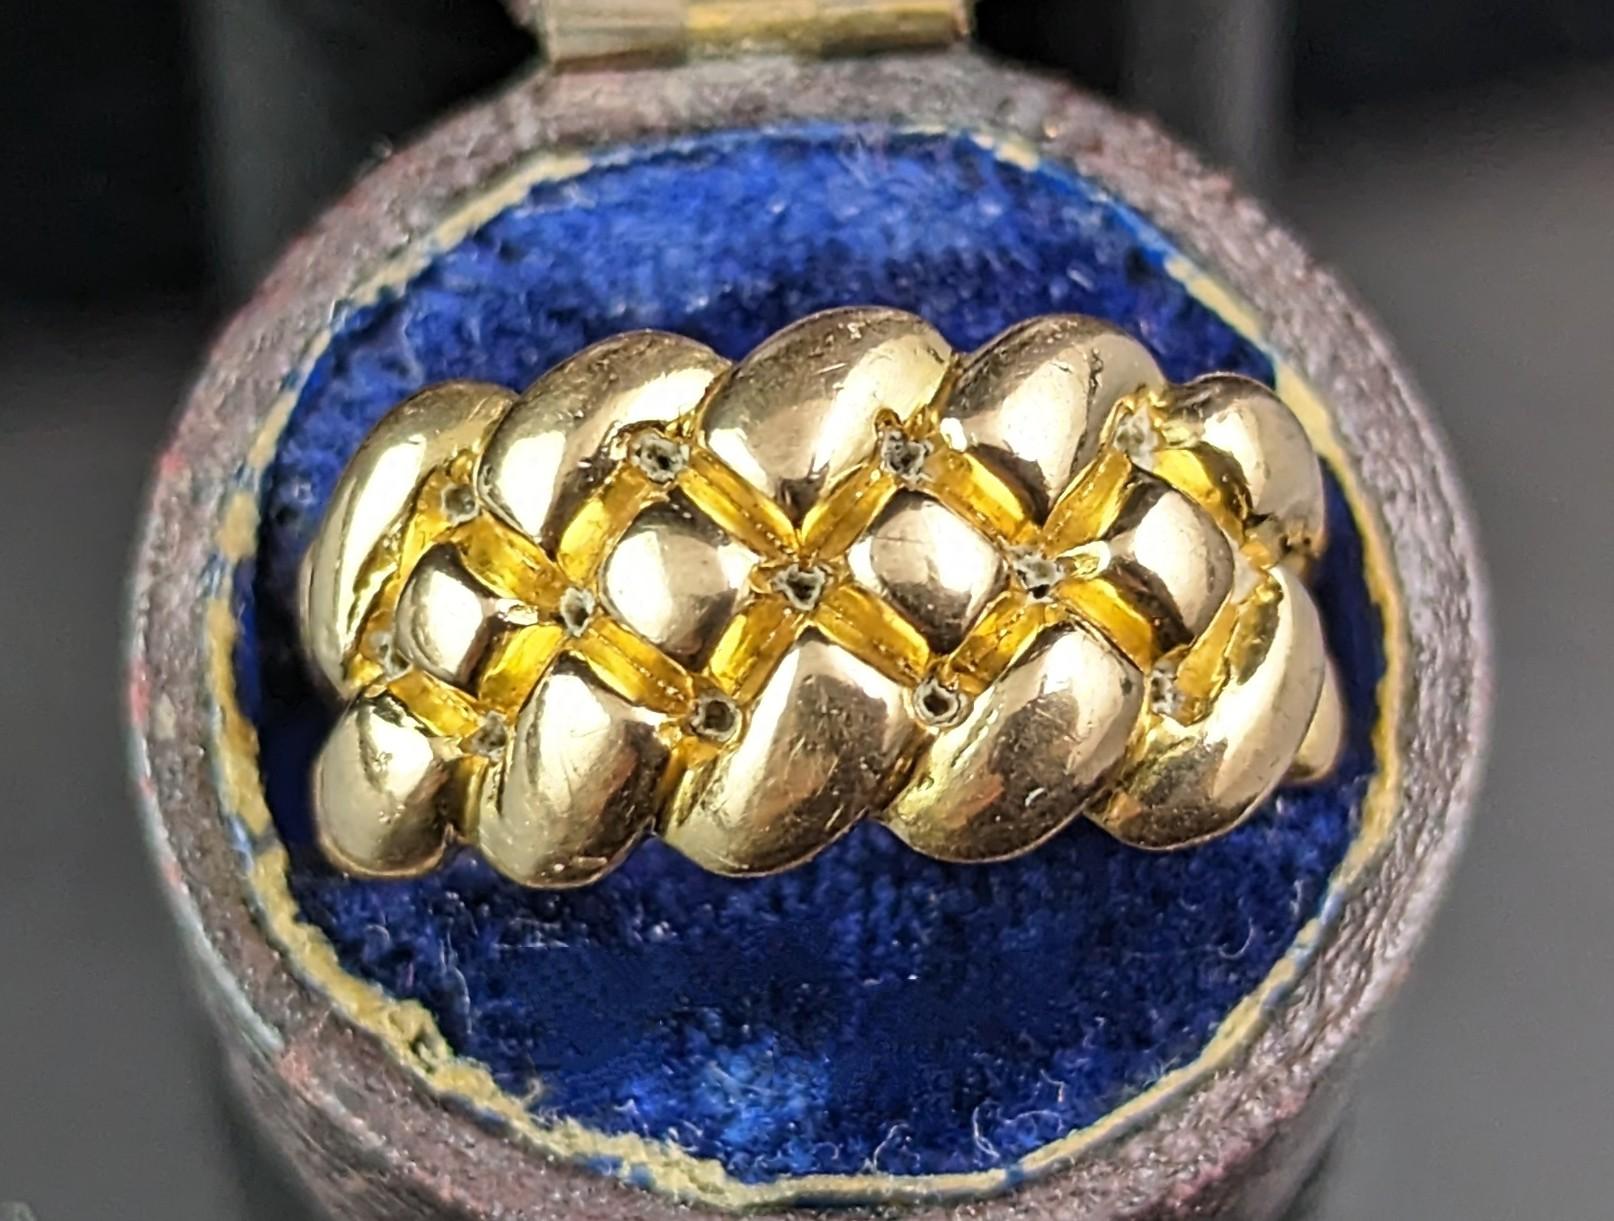 This antique 18ct gold Keeper ring is an absolute dream!

This is one of the best keeper rings I have come across with it's interesting and unique pillowy knot design and superbly rich 18ct yellow gold.

It is super chunky with a good weight and